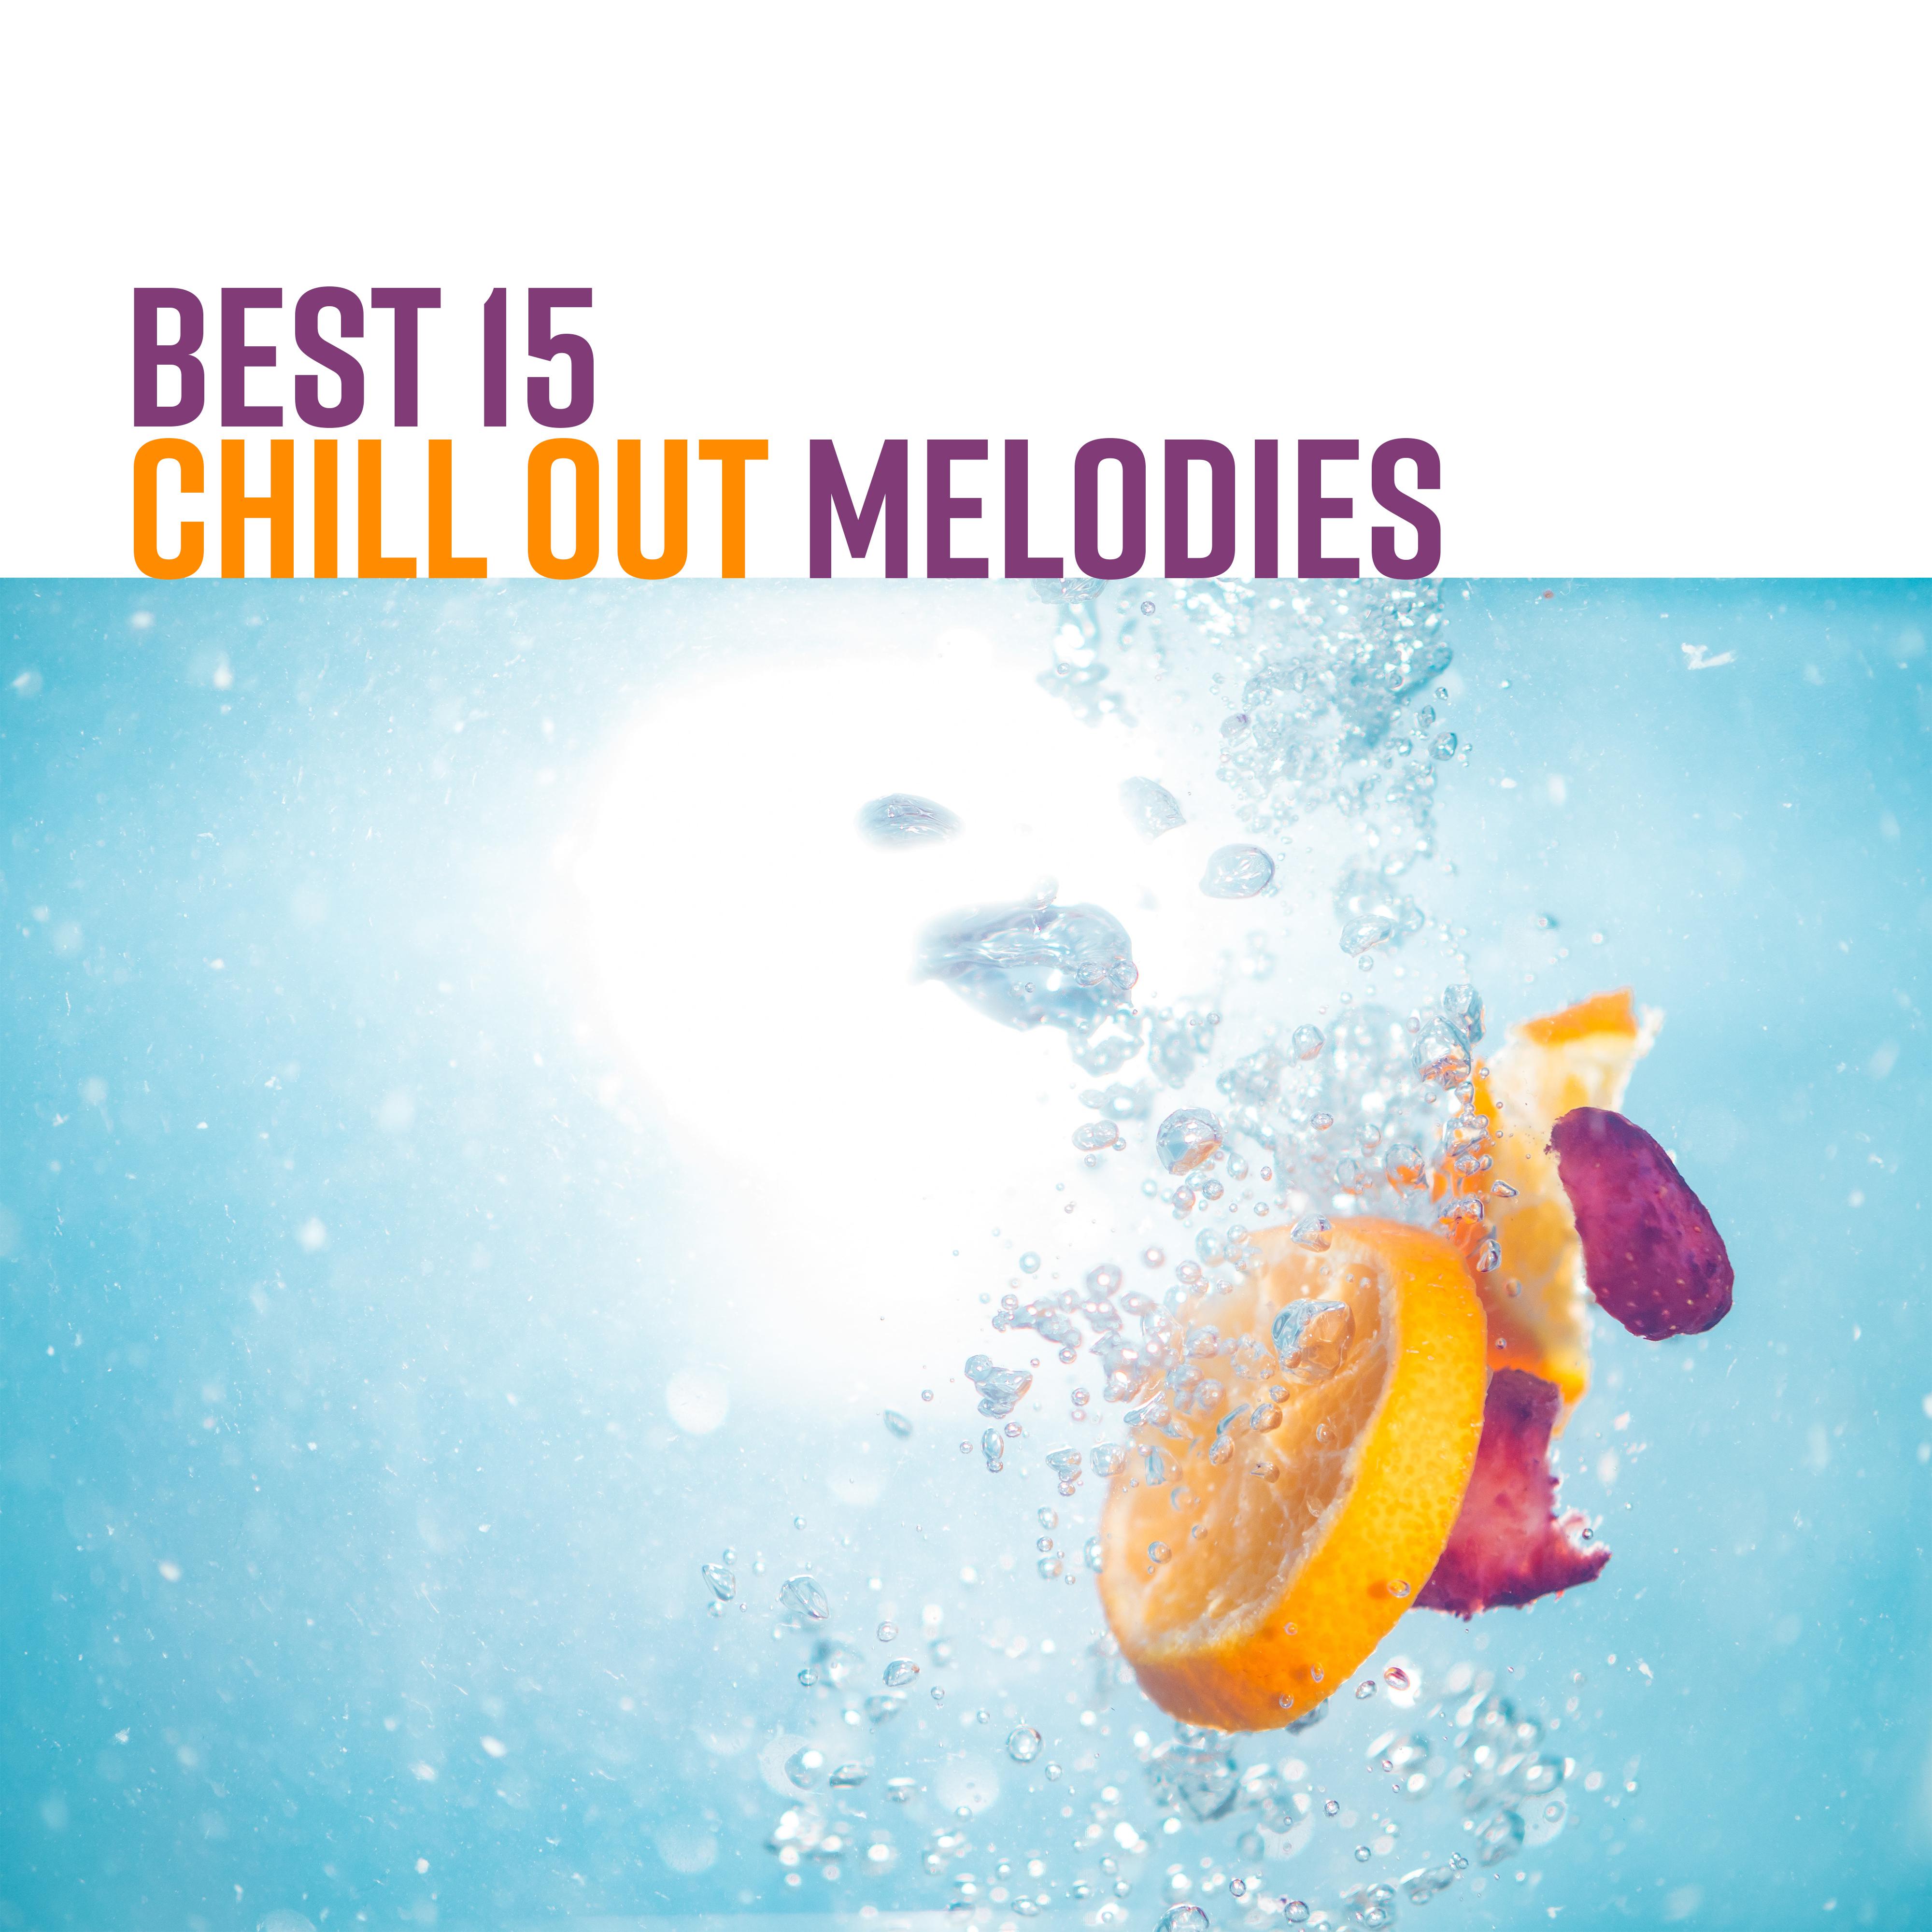 Best 15 Chill Out Melodies